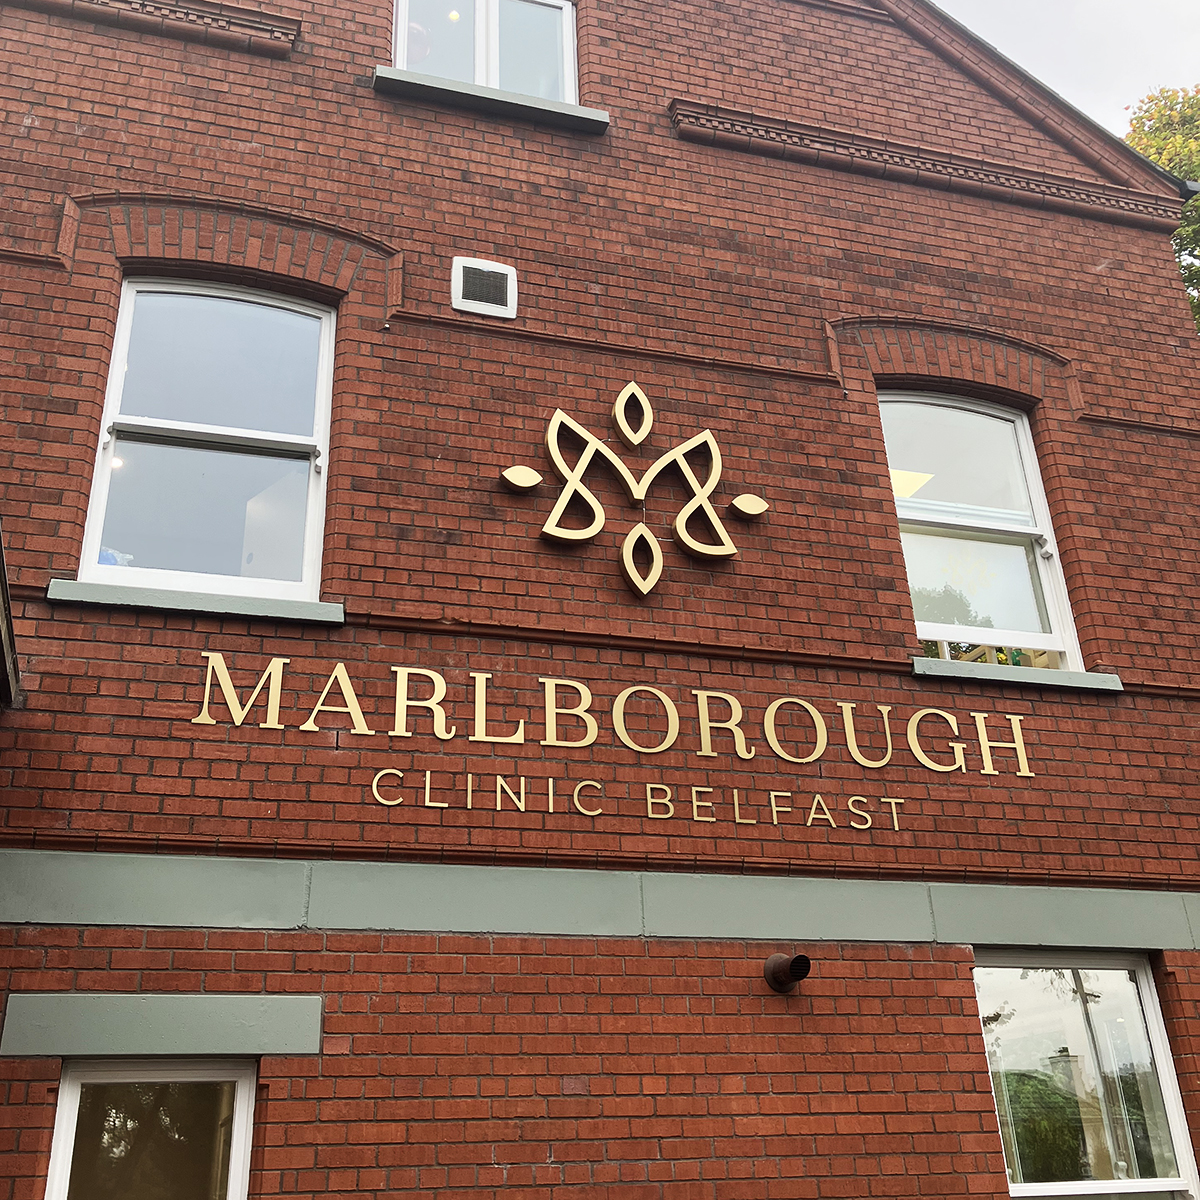 Red brick building with brushed gold stainless-steel Marlborough Clinic Belfast logo and letters